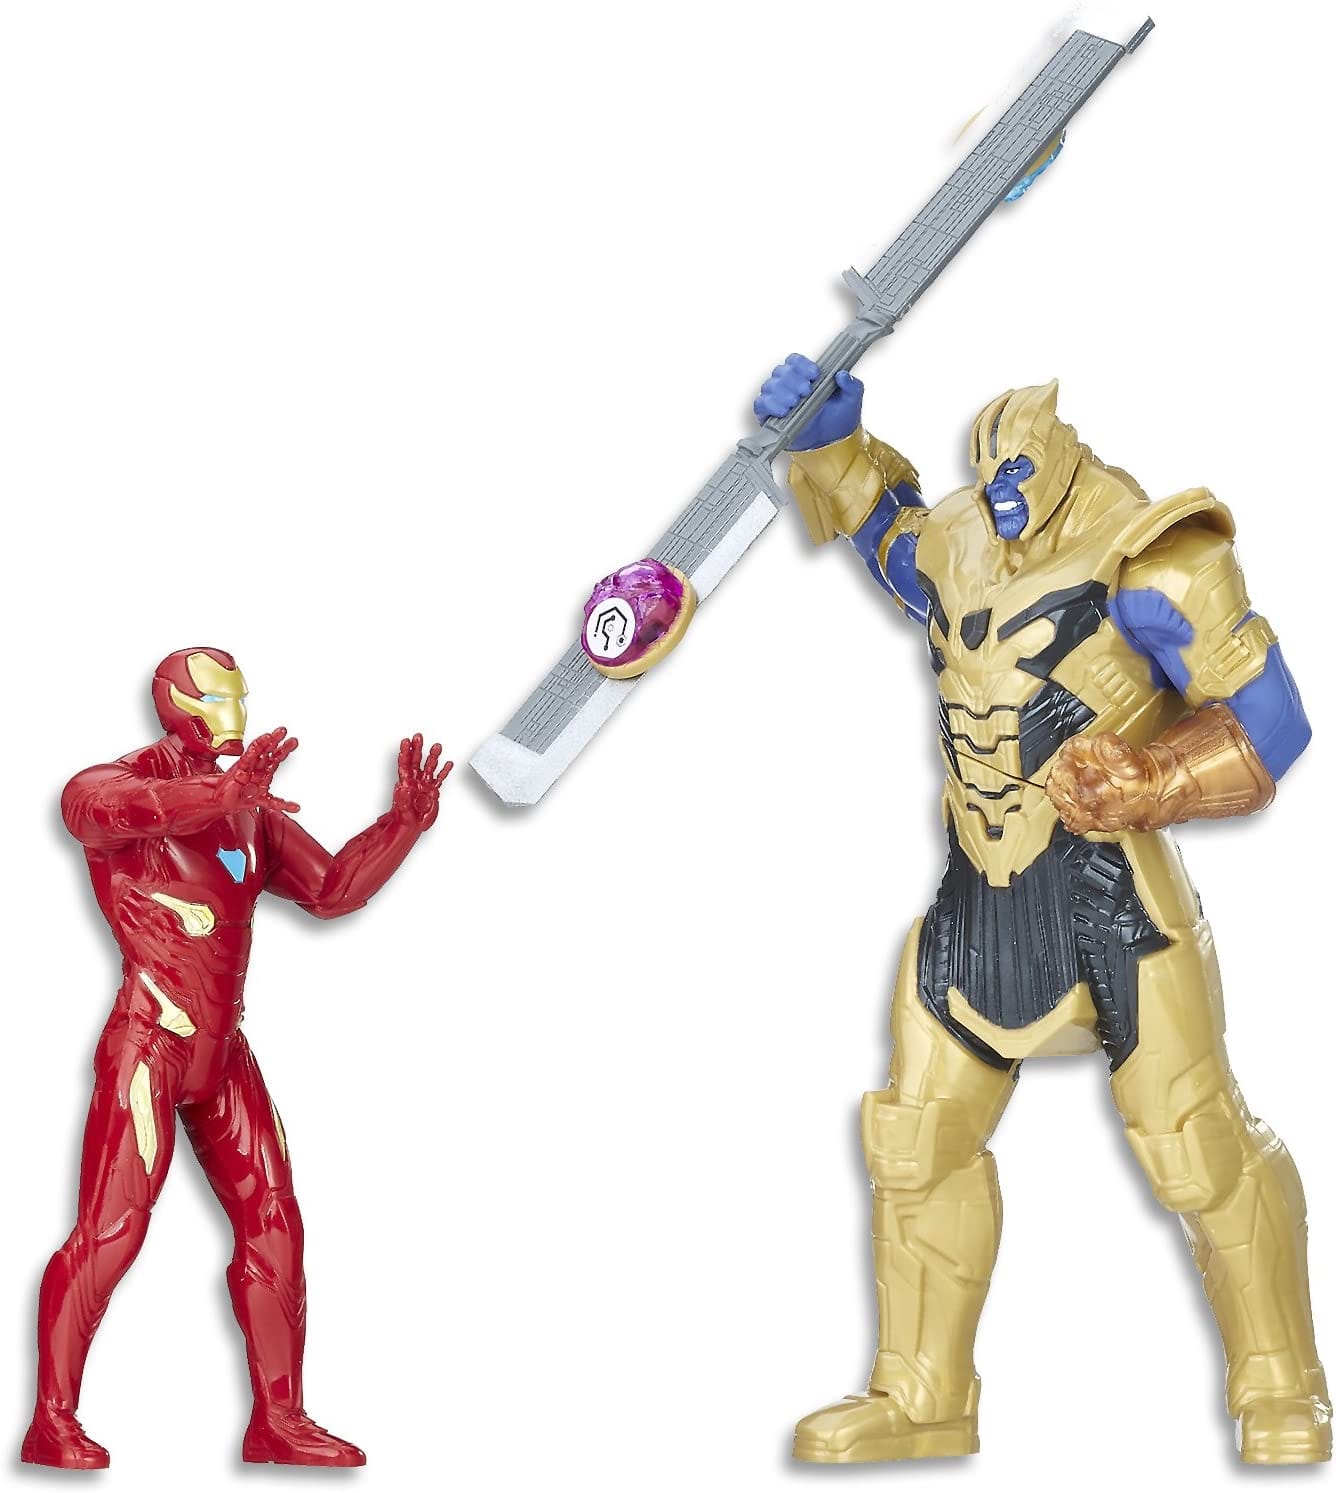 Hasbro Avengers Infinity War Iron Man Vs Thanos: When Thanos wields the Infinity Gauntlet, Iron Man gets ready to challenge his power and try to save the universe - E0559